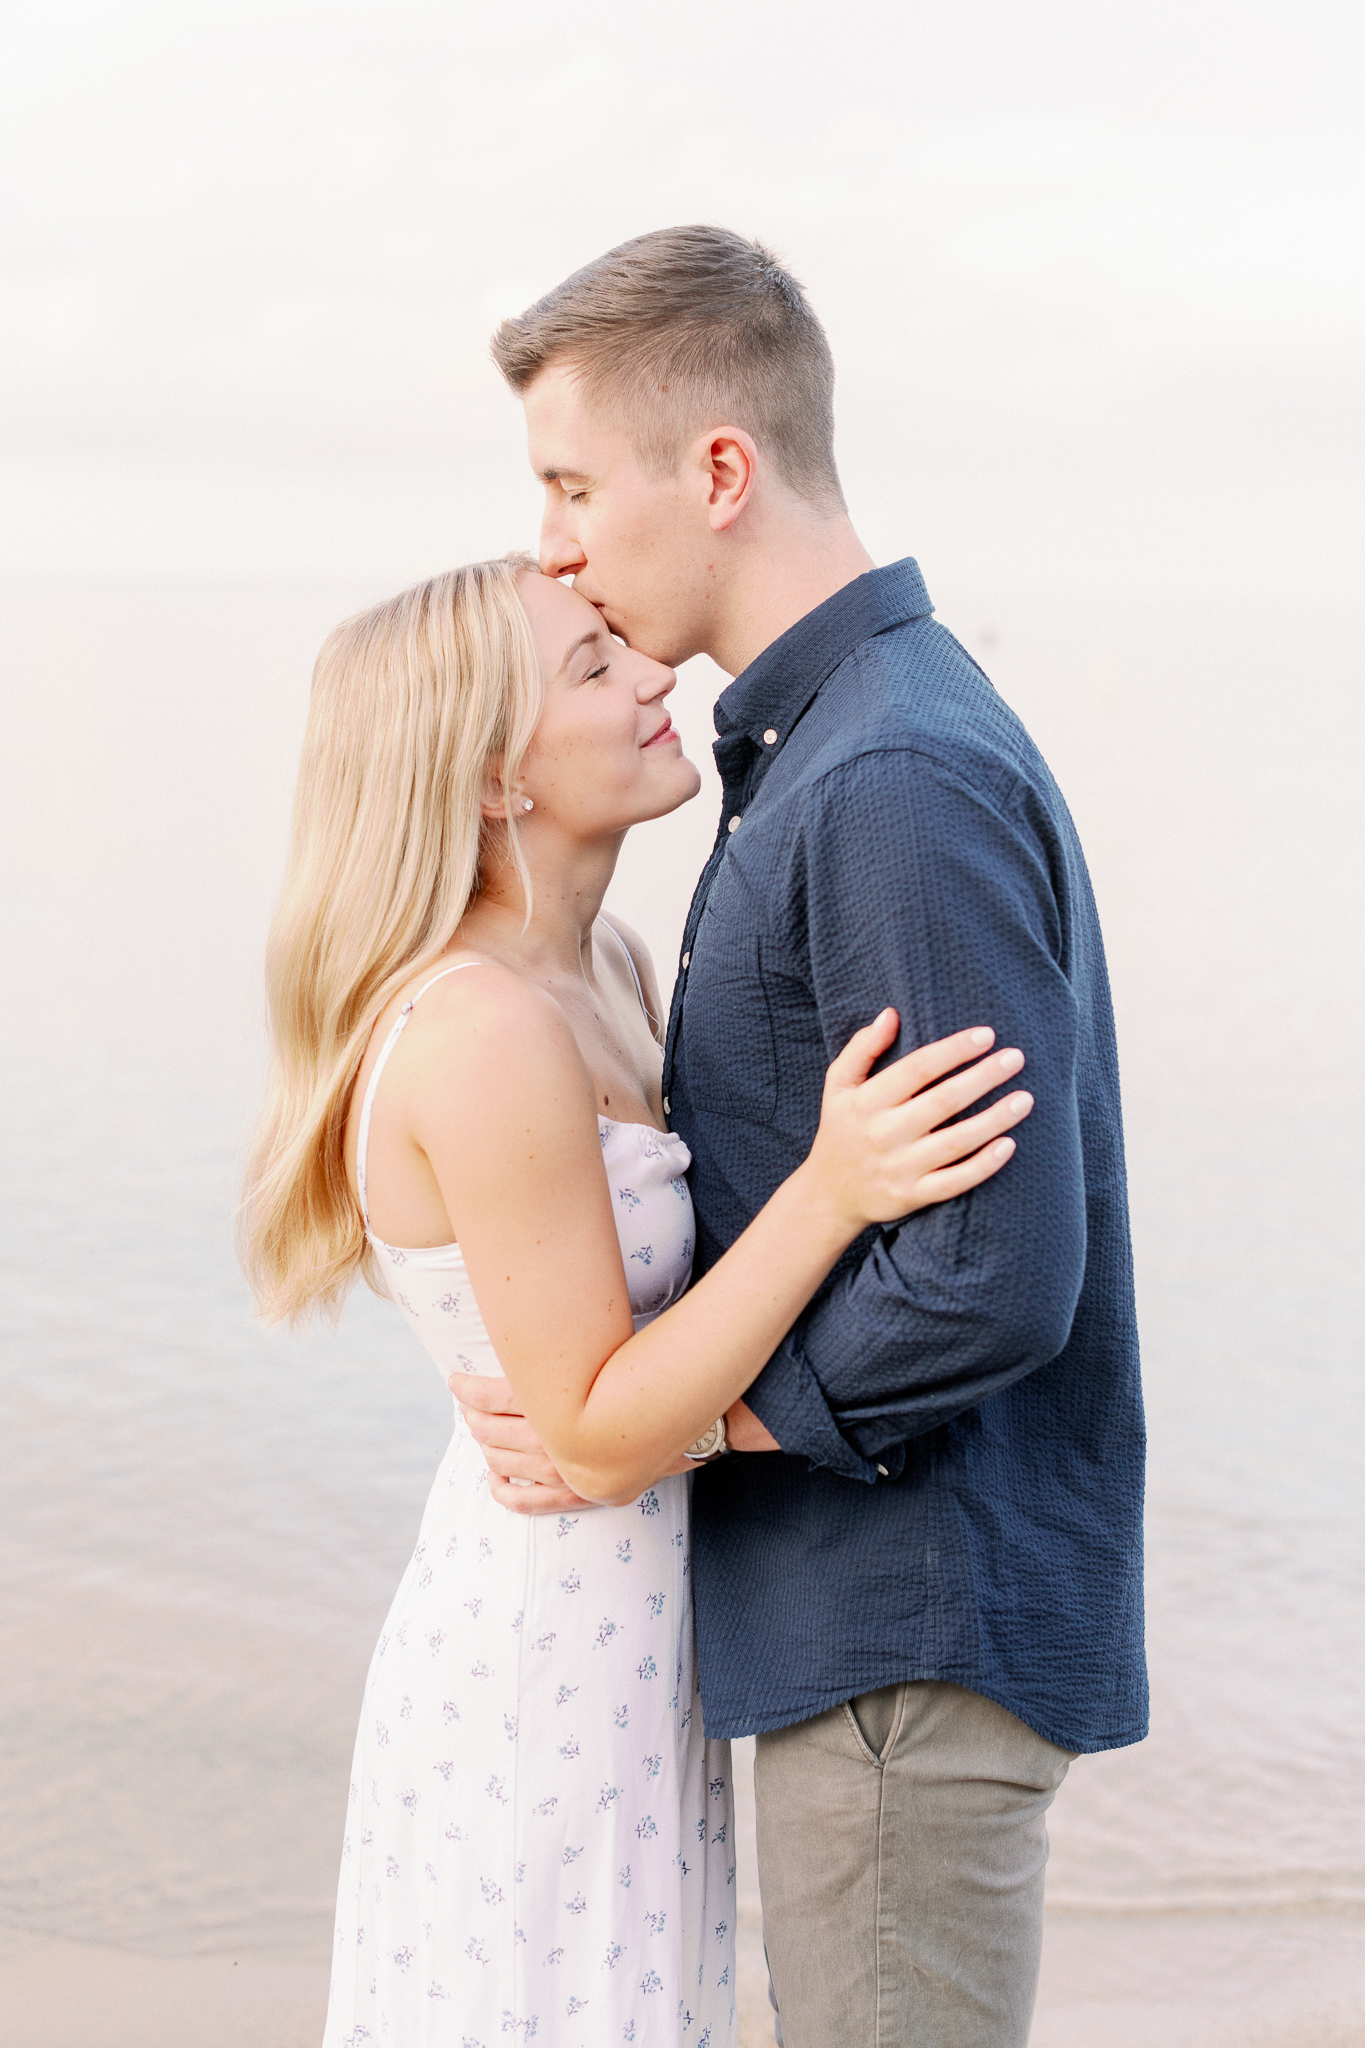 Chicago Engagement Photographer | Lake Forest Beach Photos